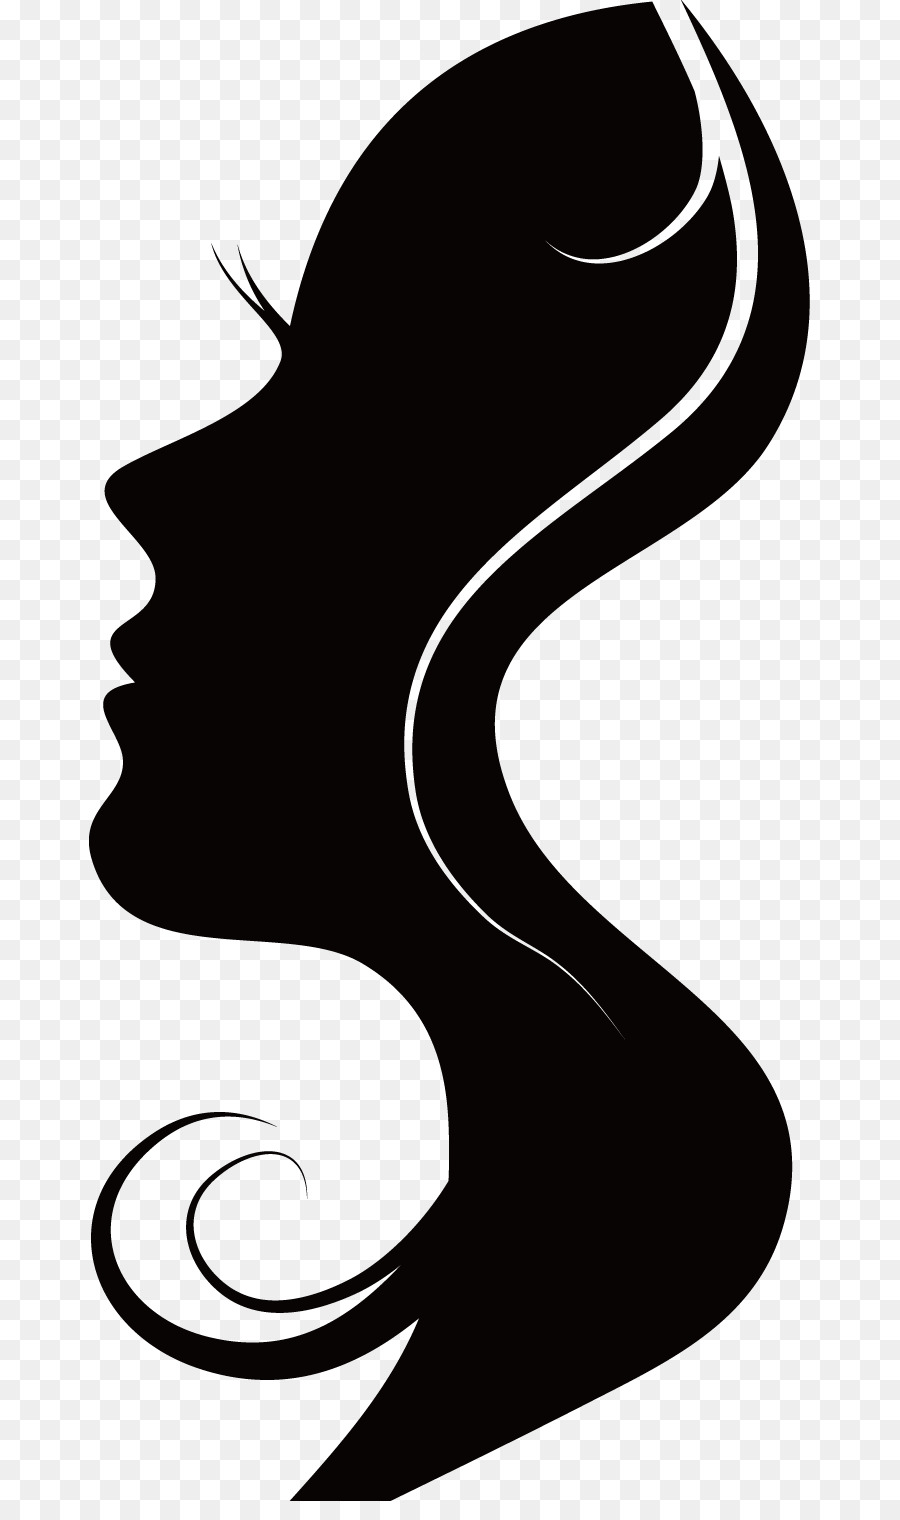 Download Free png Free Lady Silhouette Png, Download Free